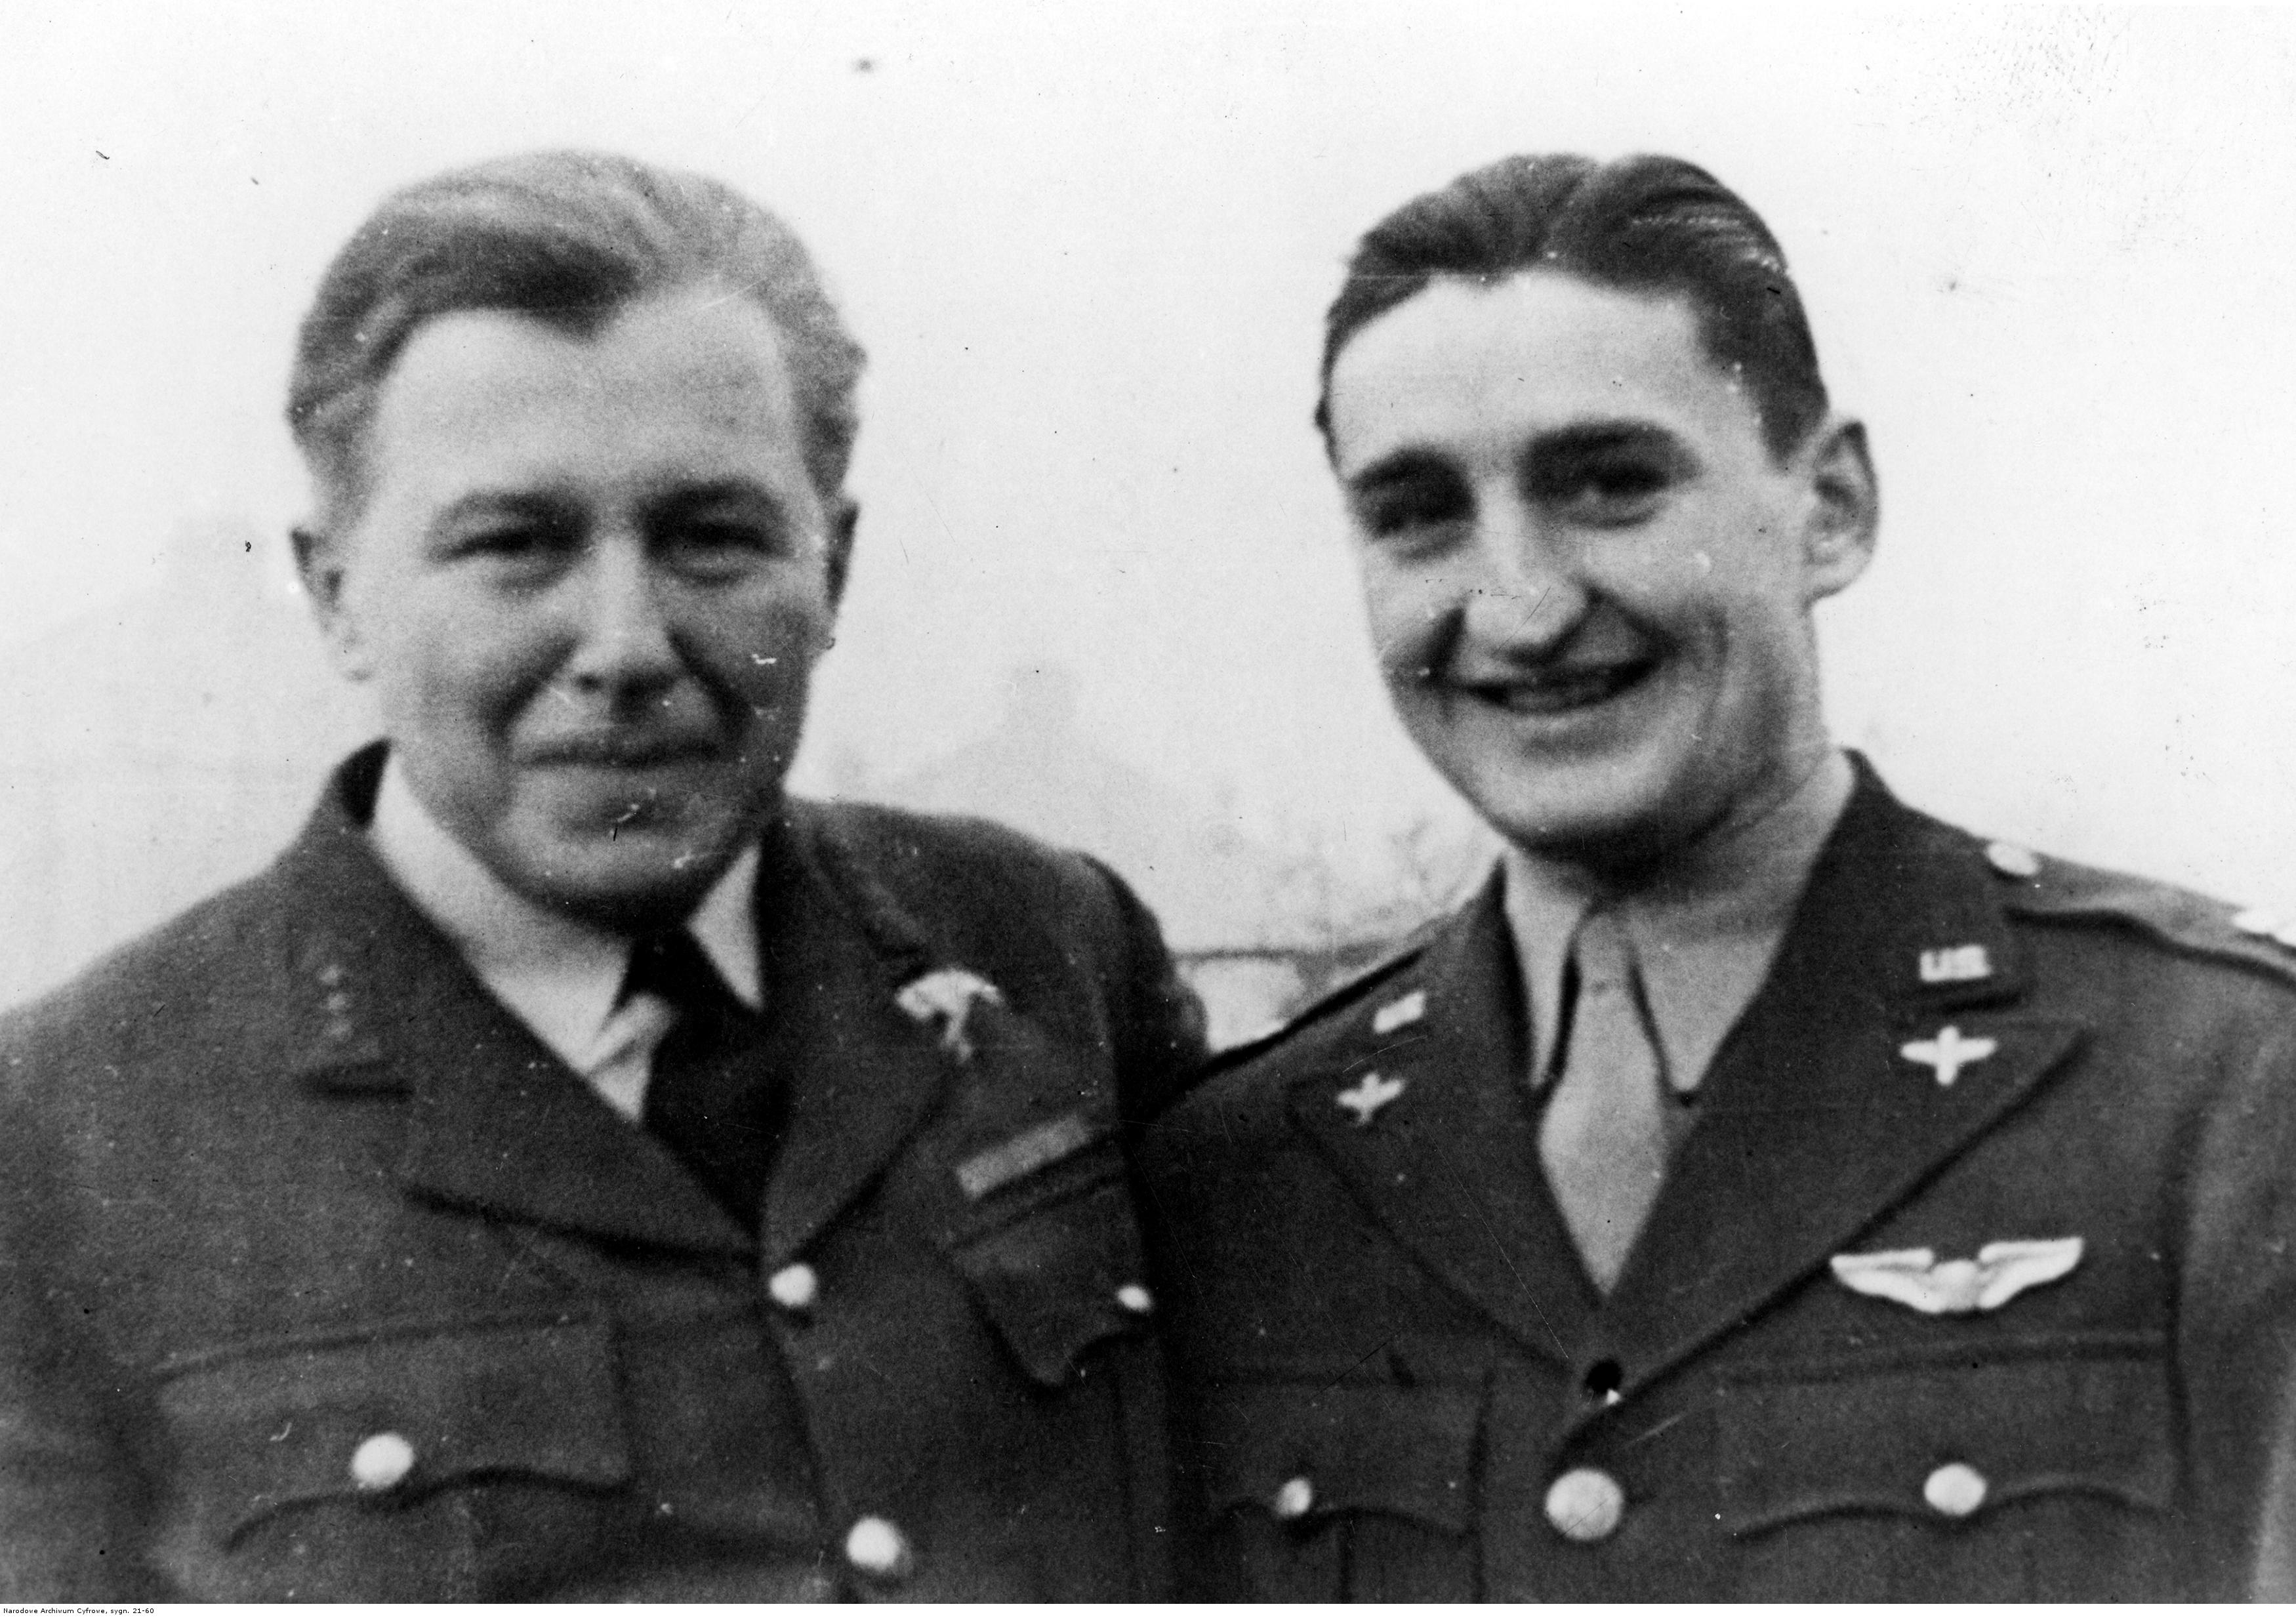 Francis Gabreski (right) with an unidentified serviceman, 1940s